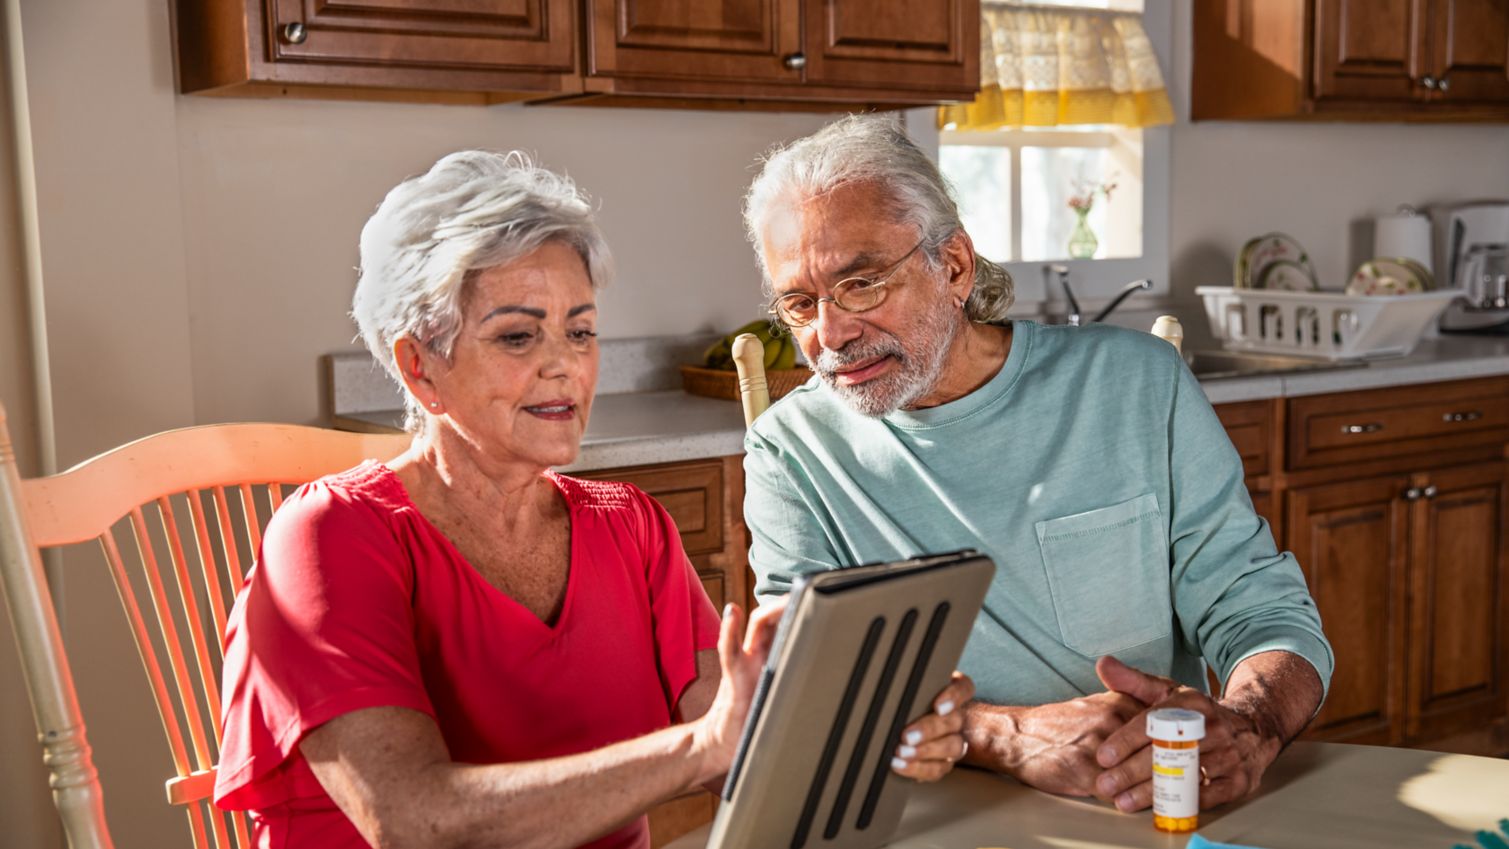 A couple looks at a tablet in their kitchen.